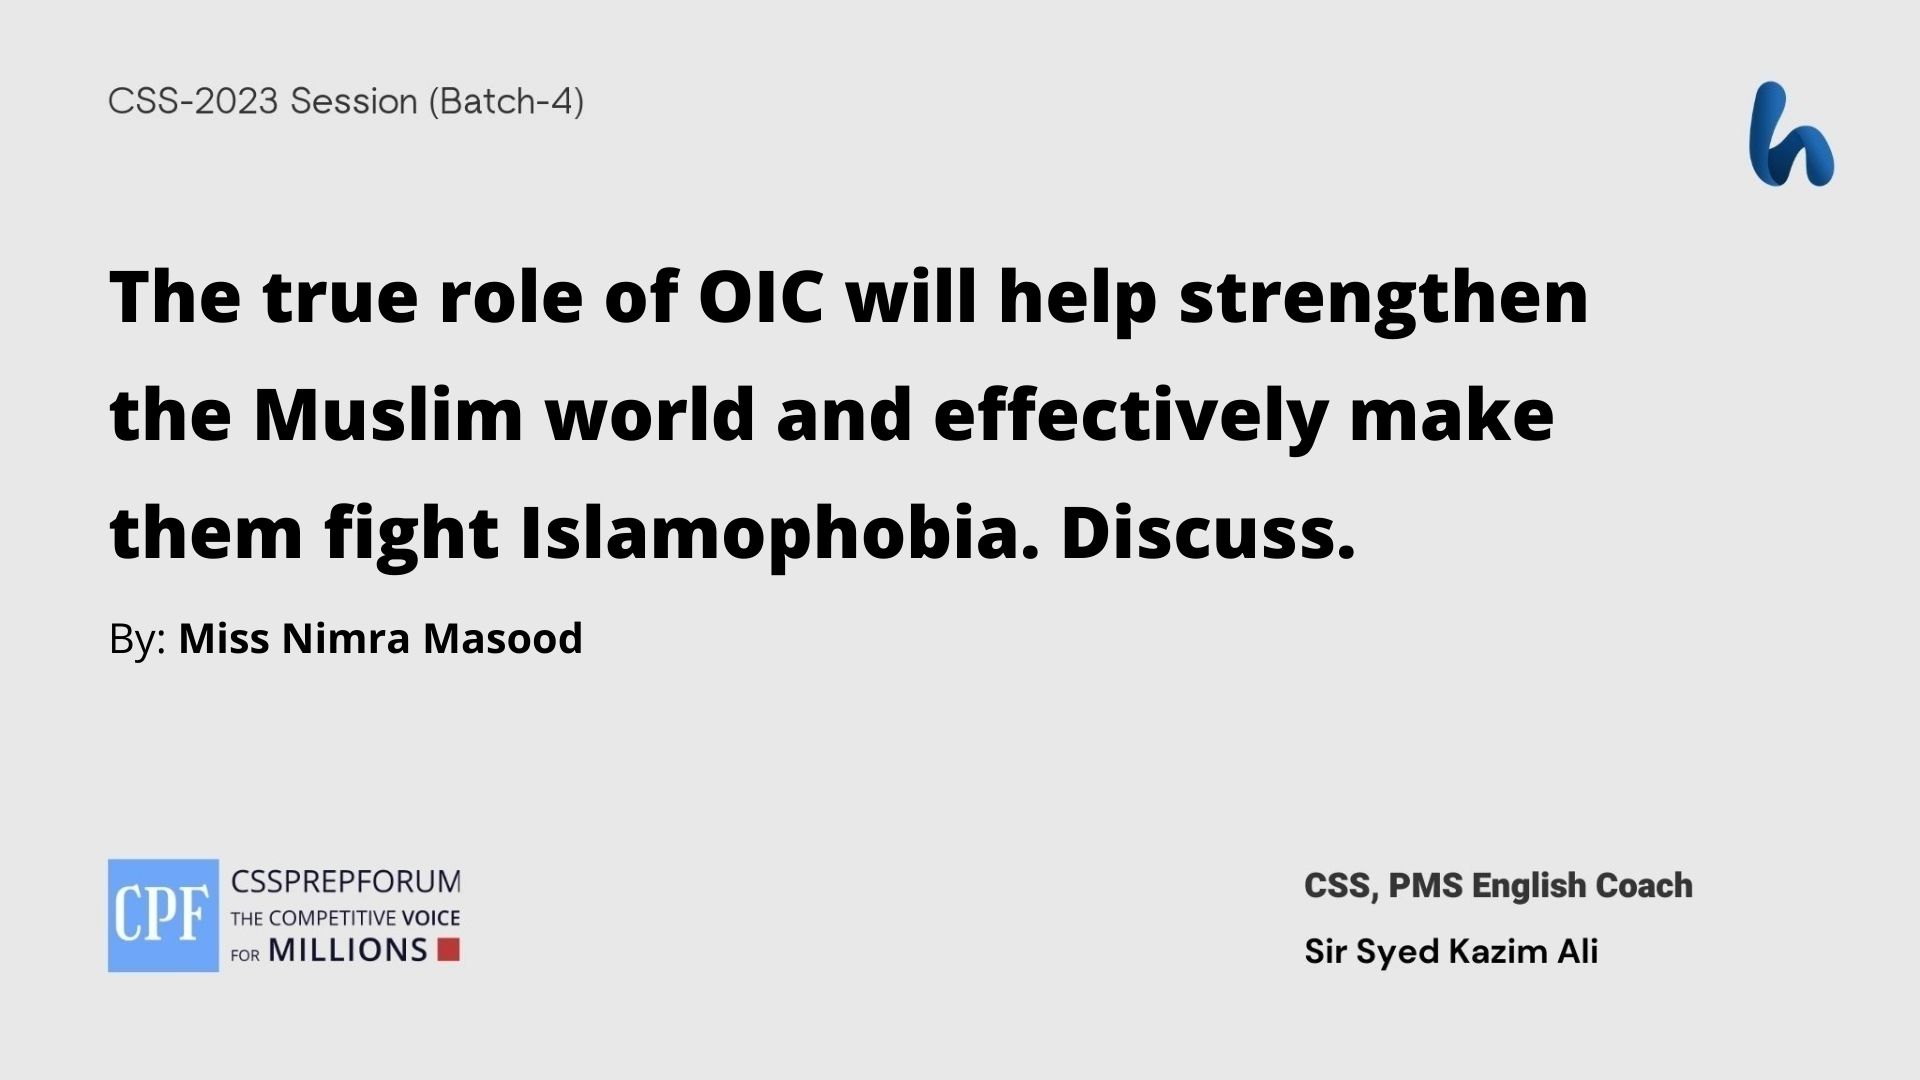 The true role of OIC will help strengthen the Muslim world and effectively make them fight Islamophobia. Discuss